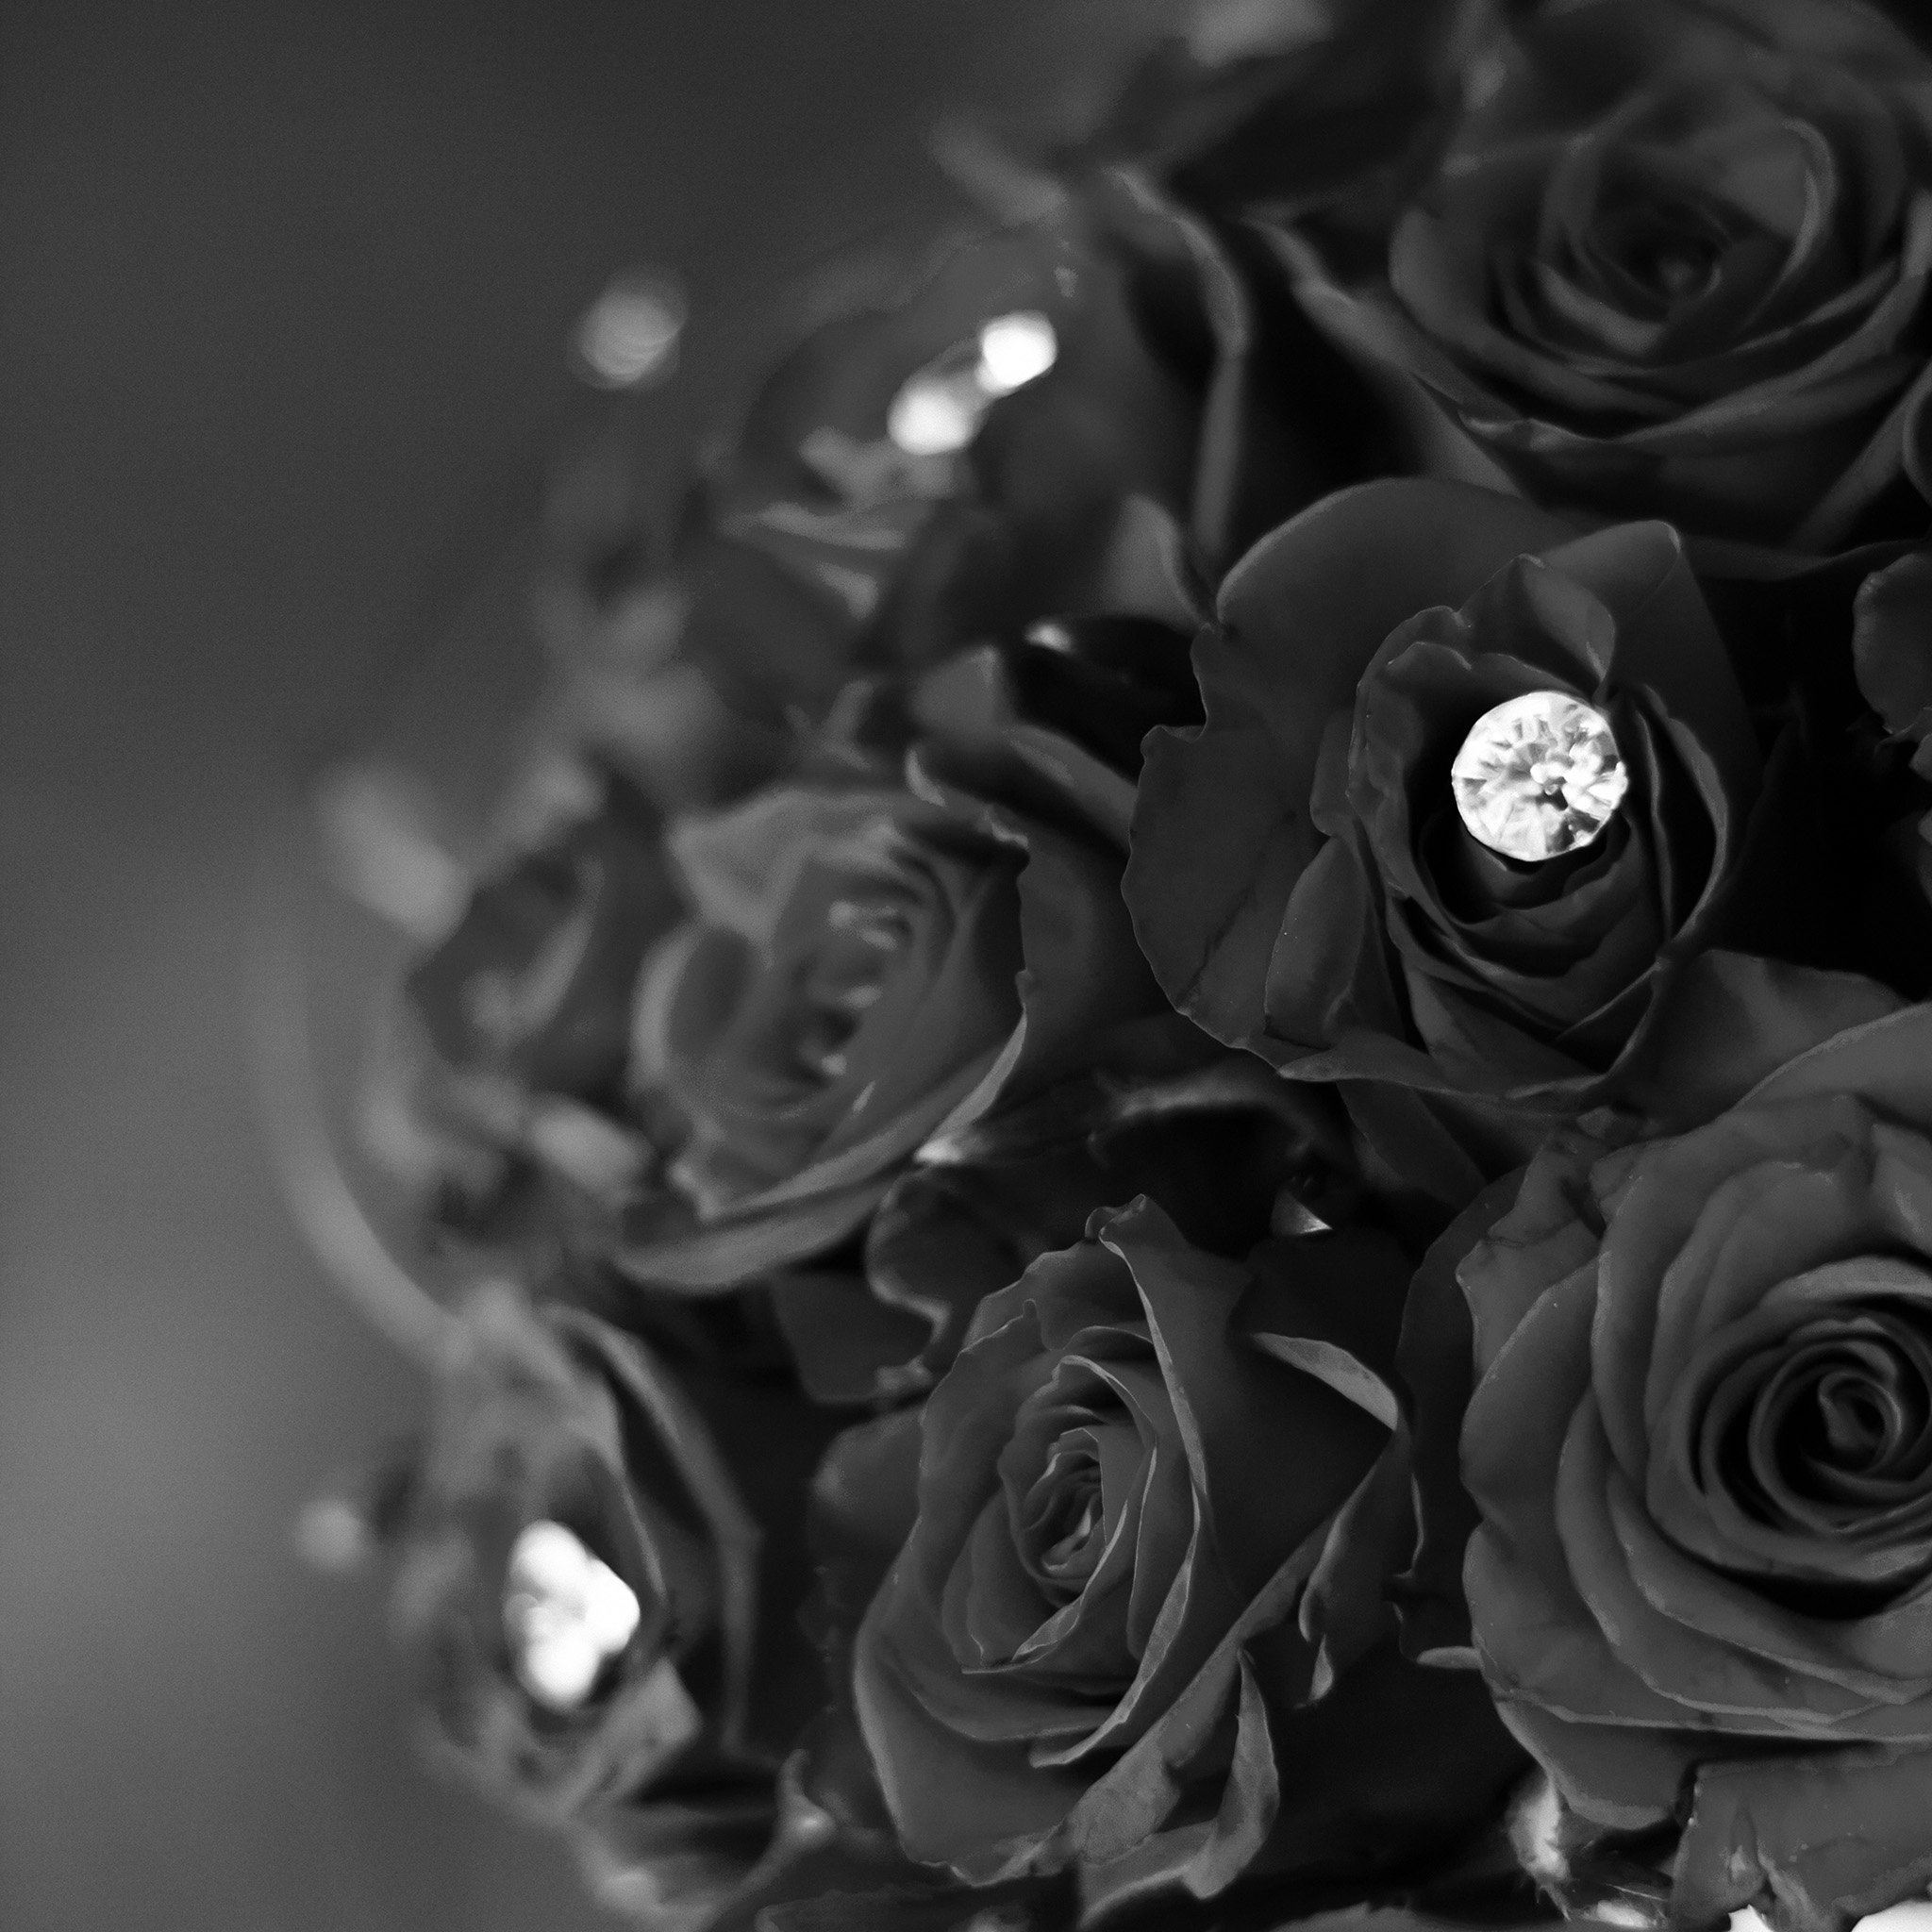 Rose Flower With Diamond Dark Bw Love Propose iPad Air Wallpapers Free  Download